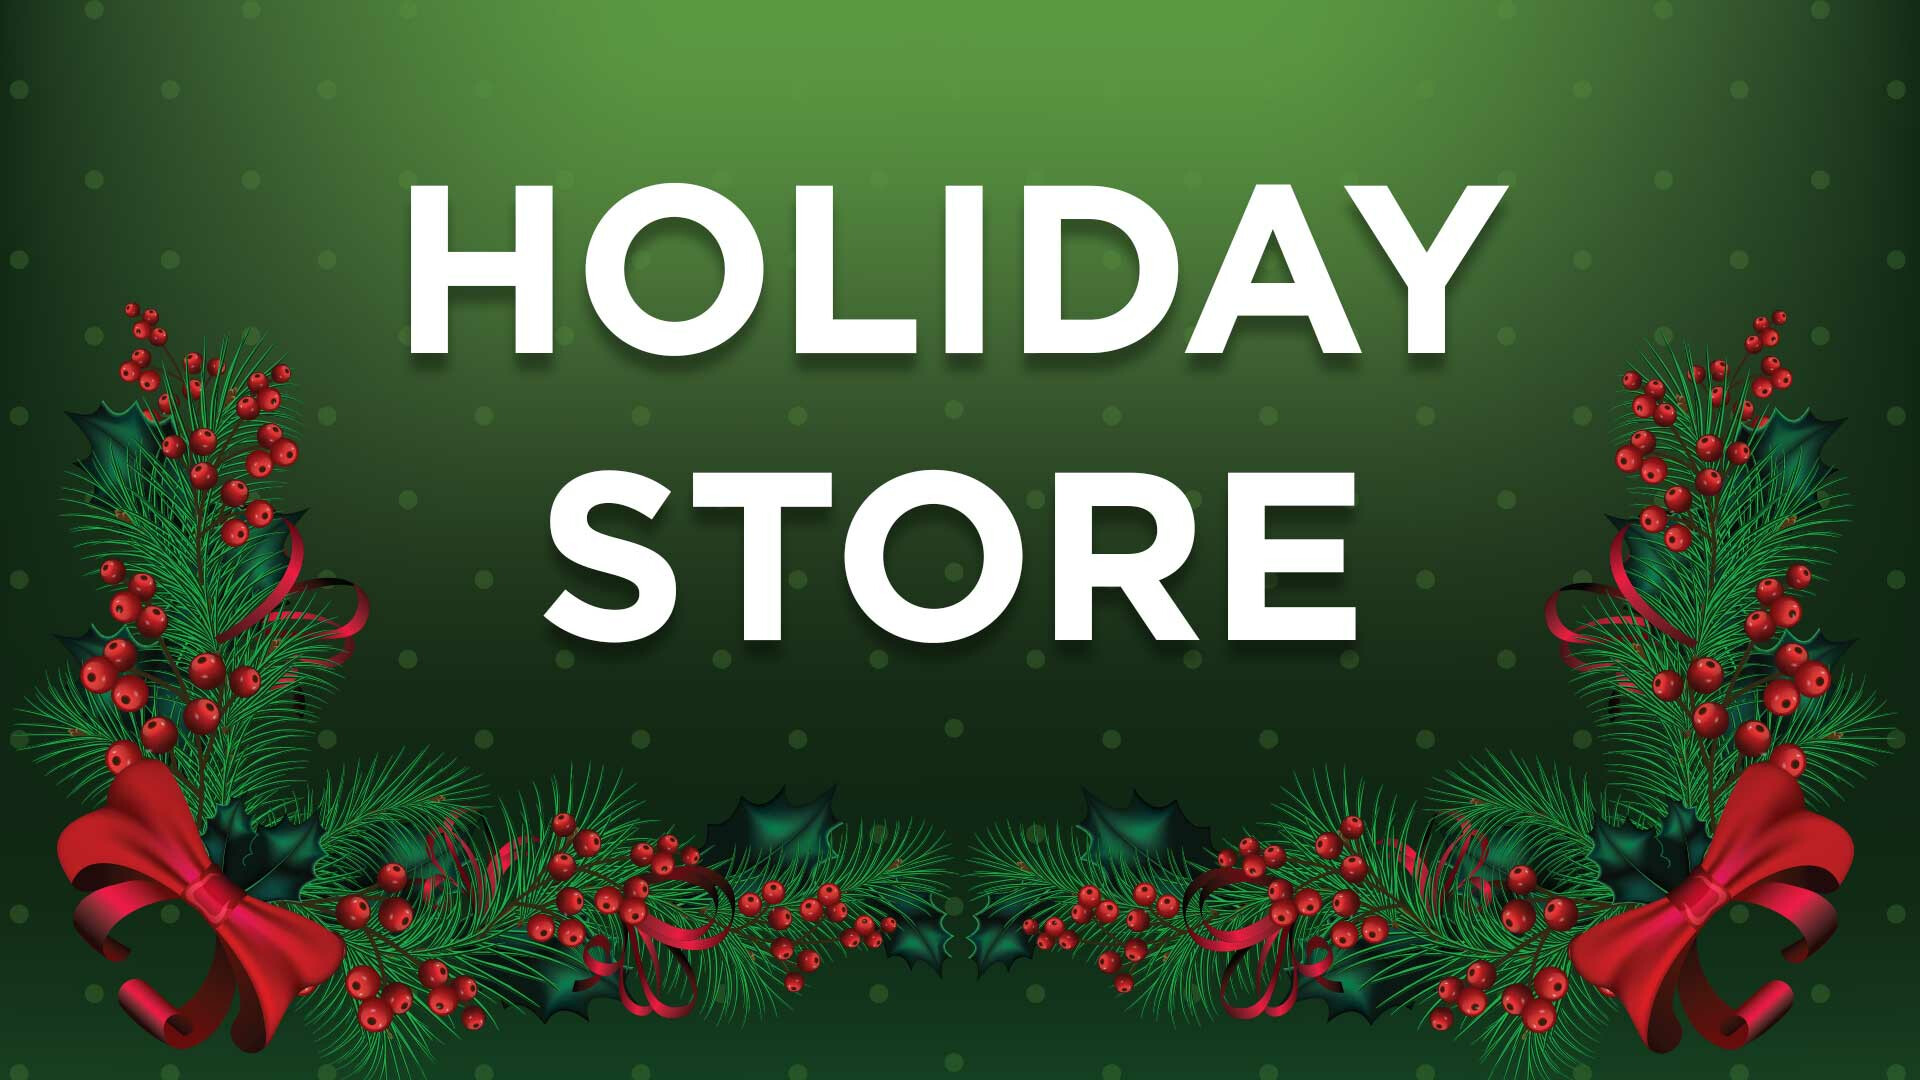 The Giving Tree Holiday Store 